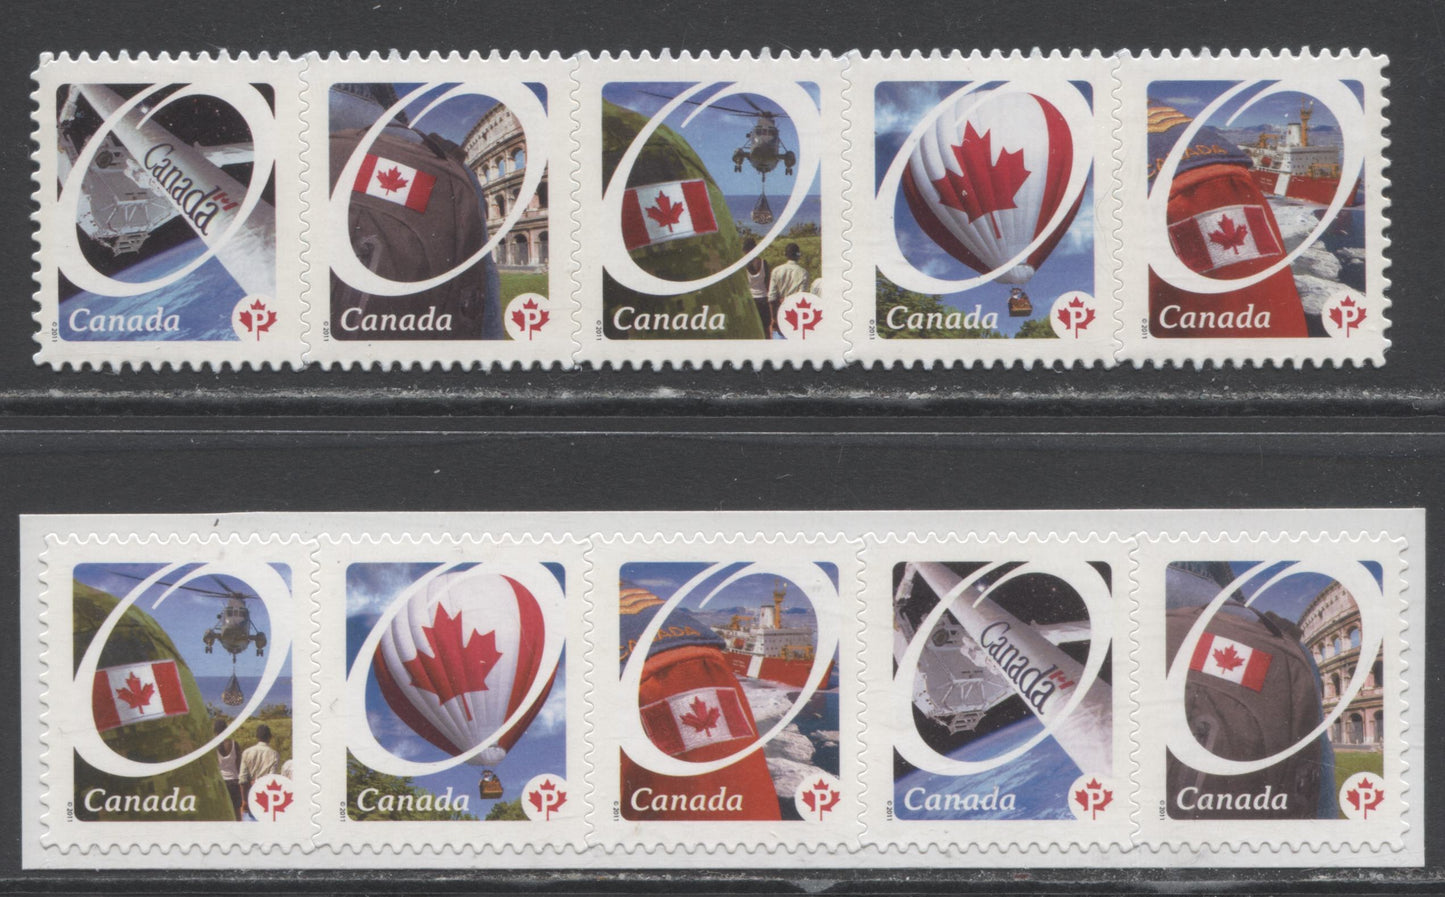 Lot 127 Canada #2423i,aii P(59c) Multicolored Flags, 2011 Canadian Pride, 2 VFNH Die Cut & Booklet Strips Of 5 With Fluorescent Yellow Ink